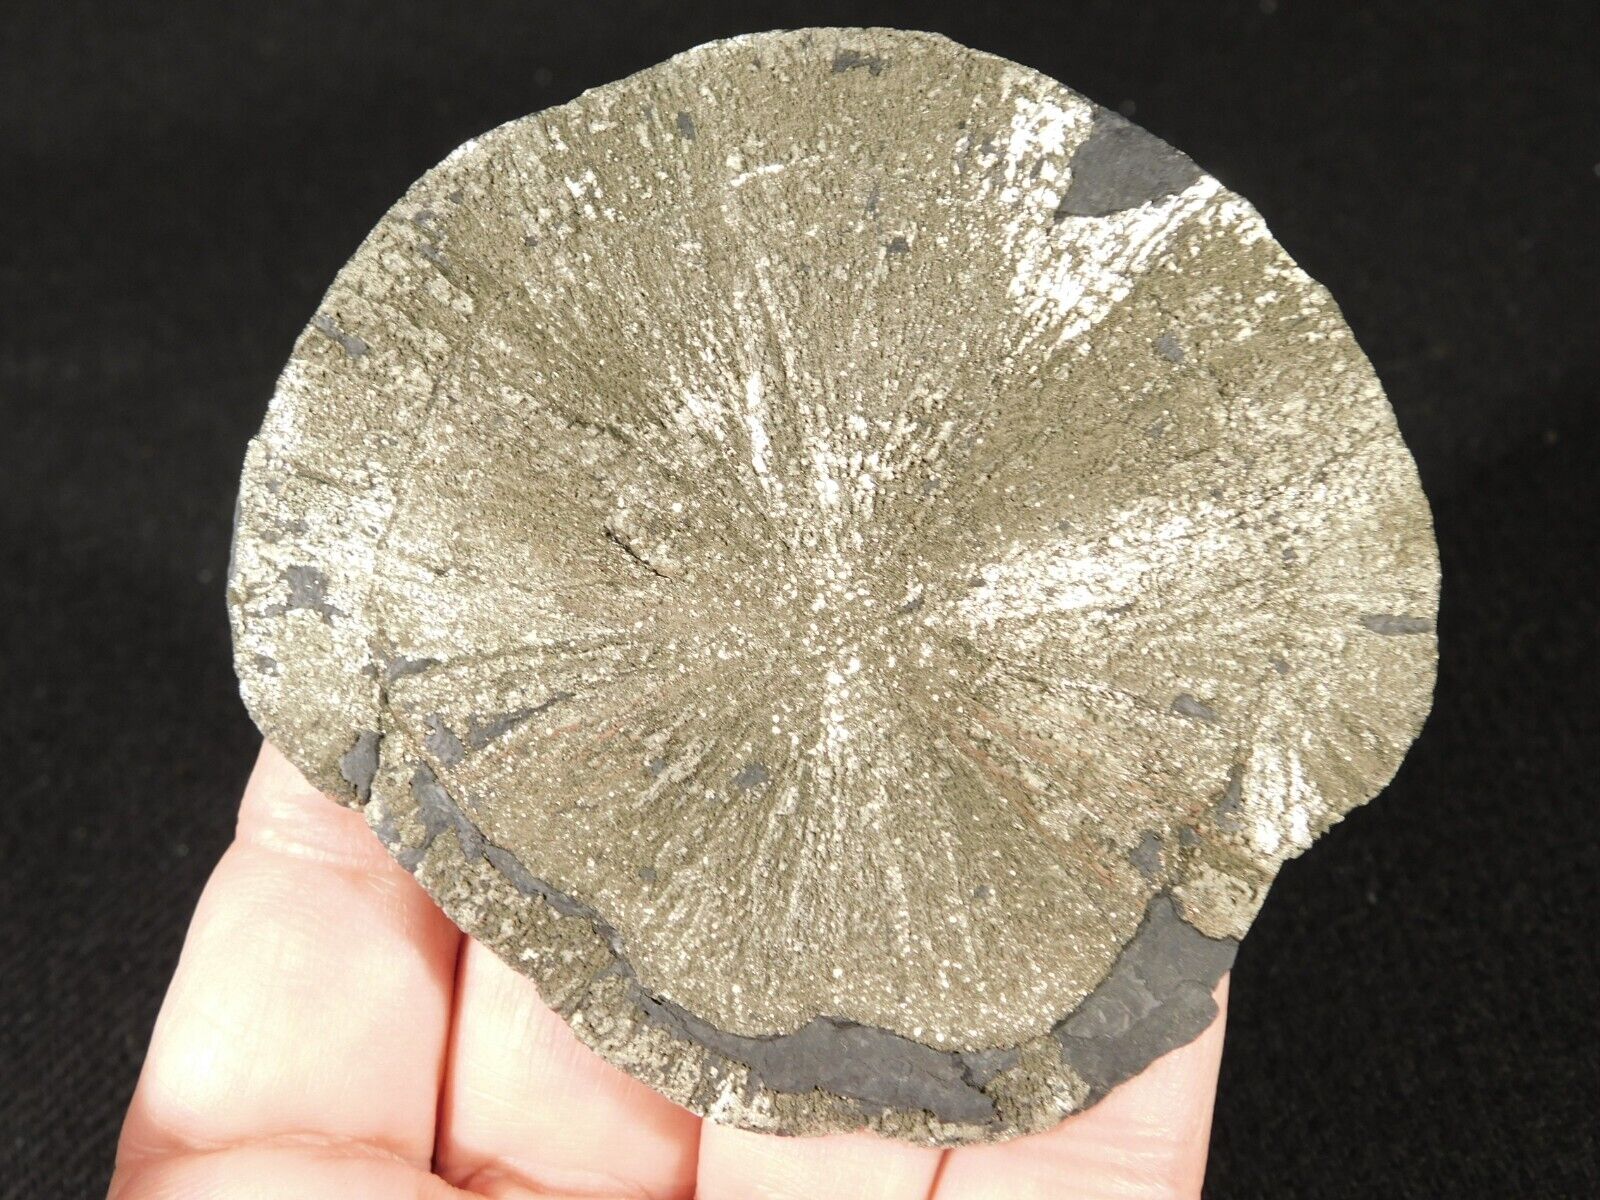 Larger Pyrite SUN or Pyrite Crystal DISC 100% Natural Illinois 118gr